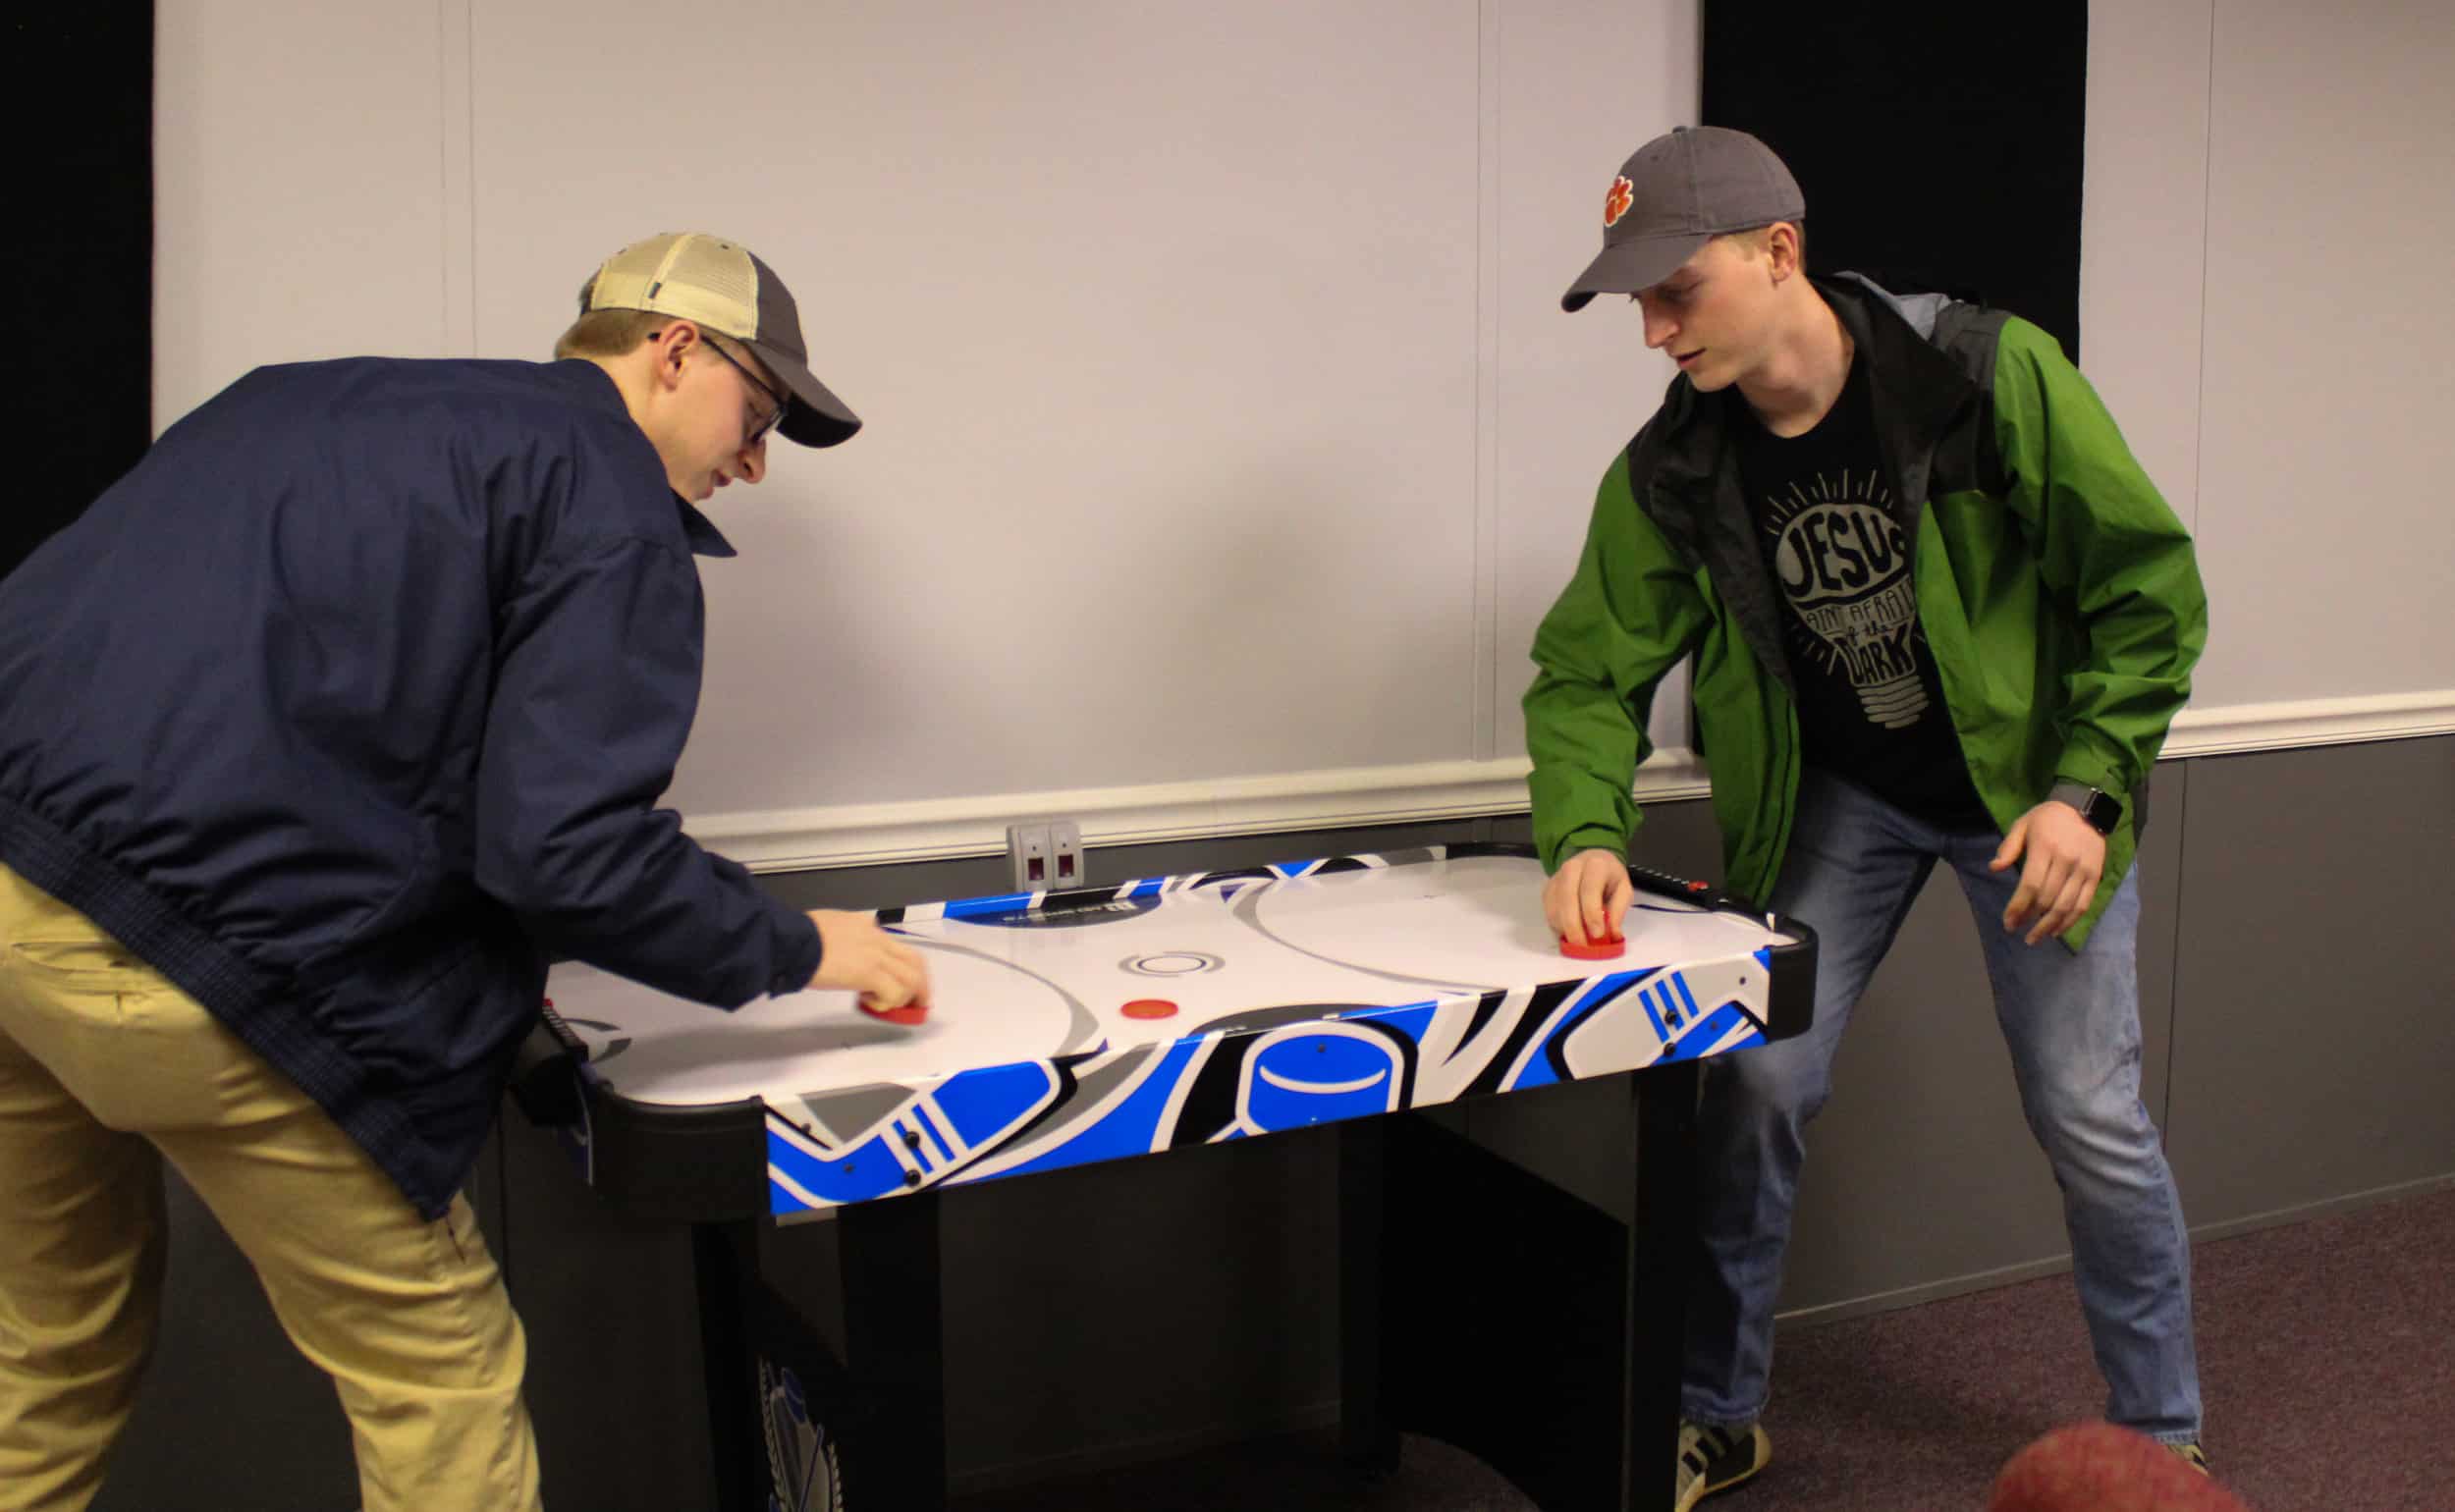 Youth leaders Will and Nathan Ingle brawl in a game of air hockey.